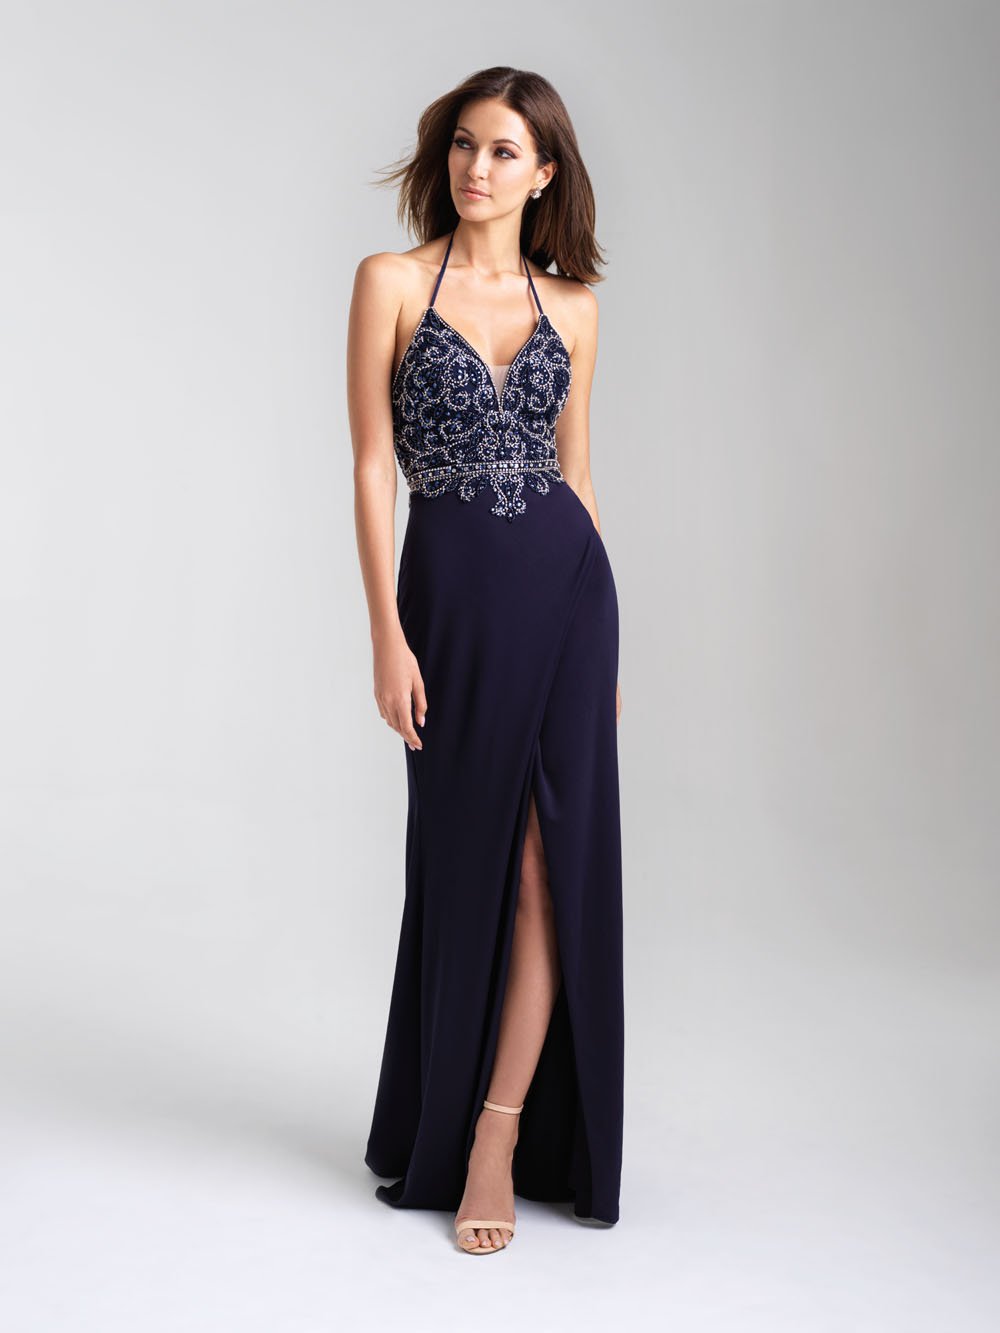 Madison James 20-322 dress images in these colors: Black, Navy, Mauve.